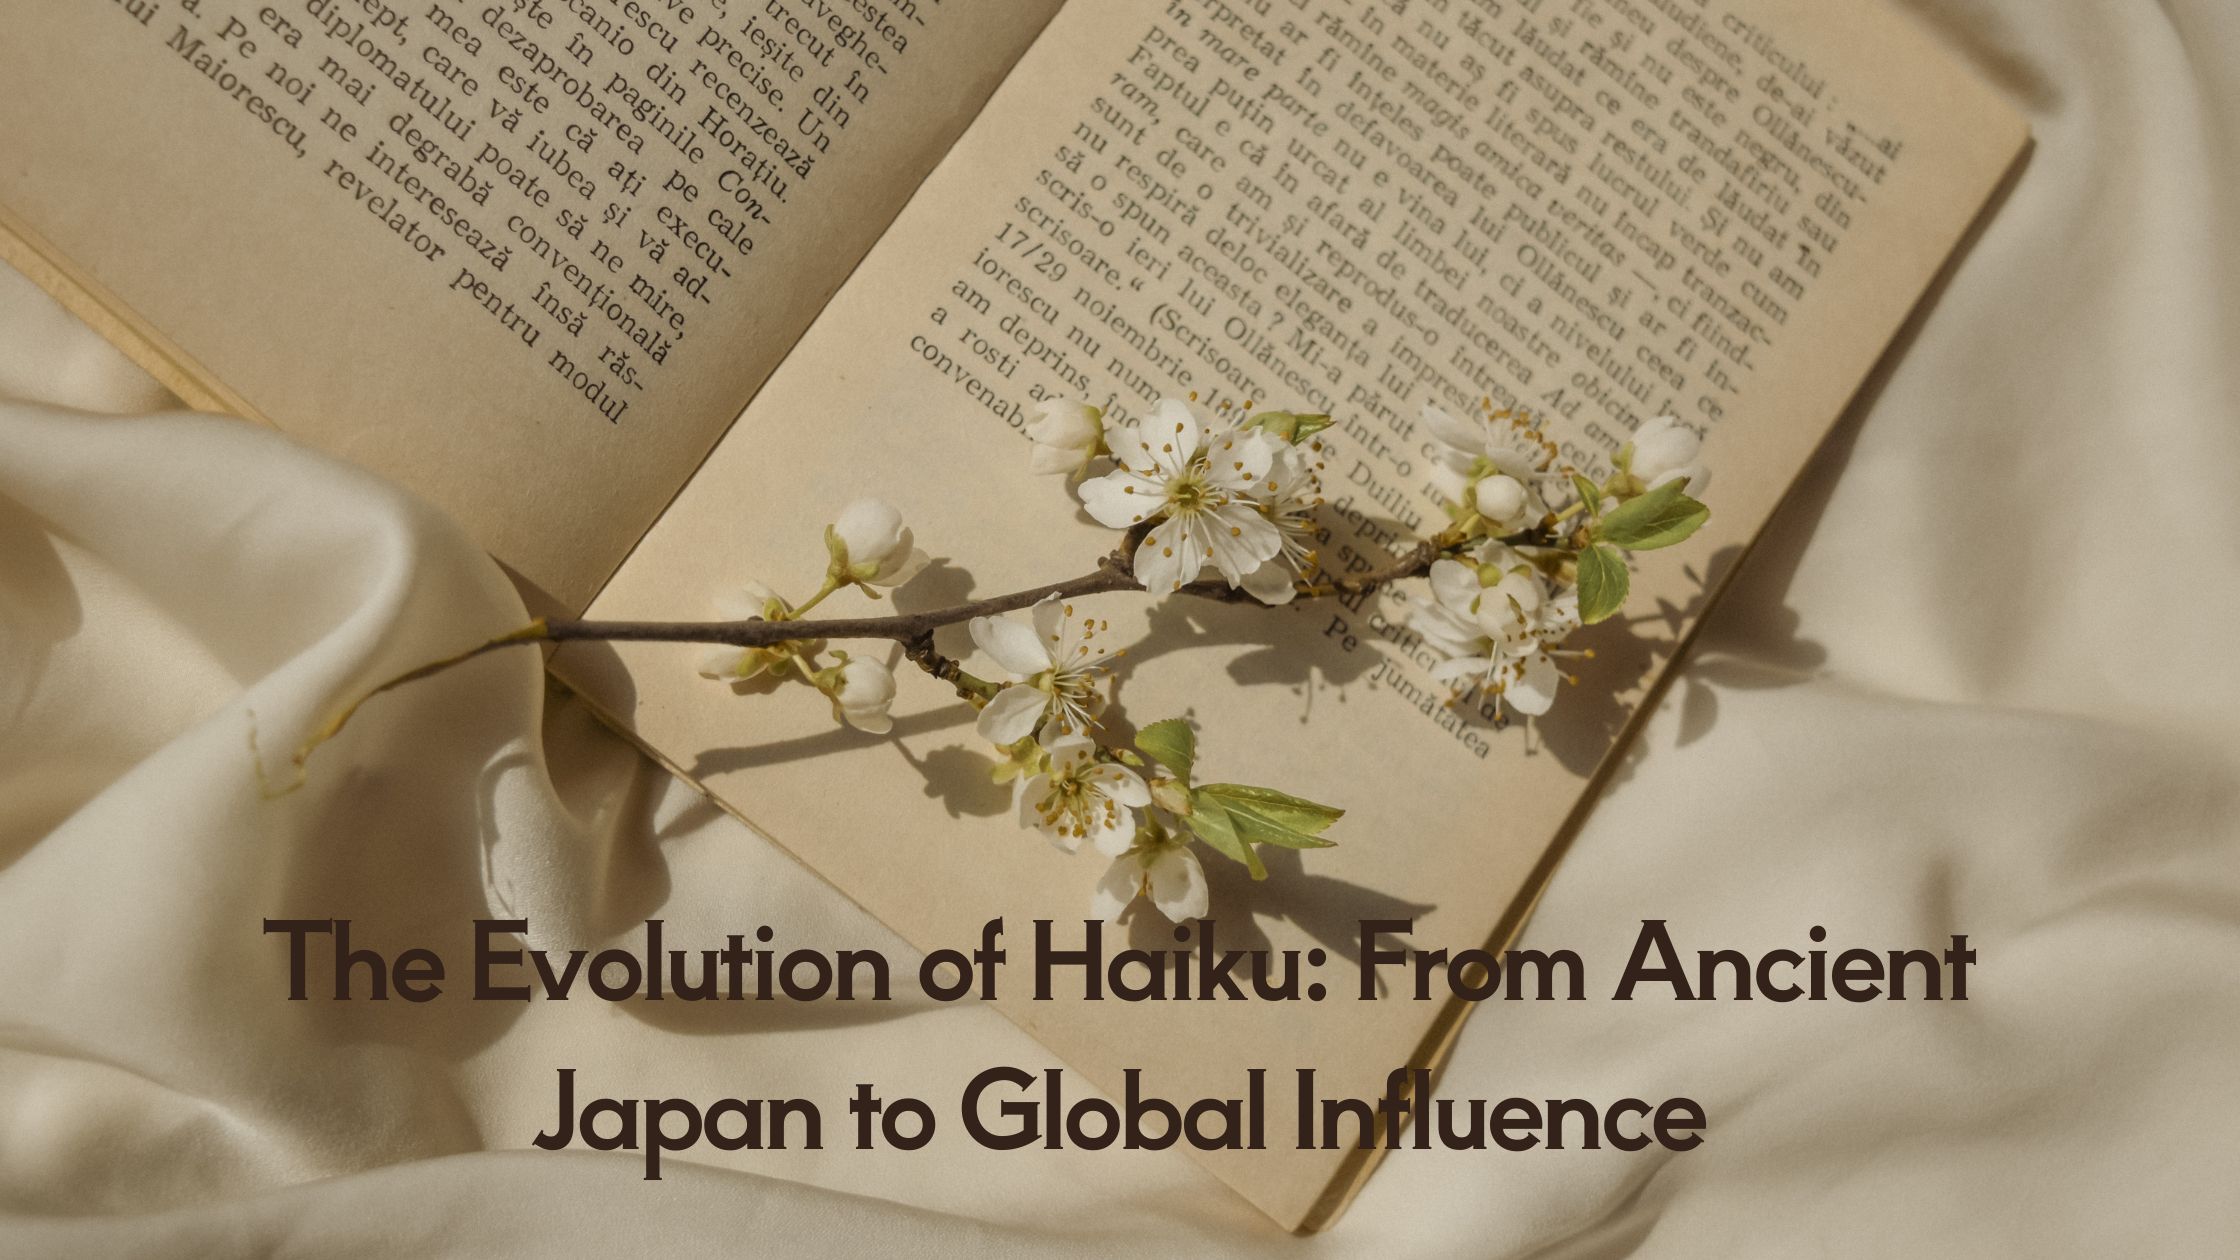 The Evolution of Haiku: From Ancient Japan to Global Influence